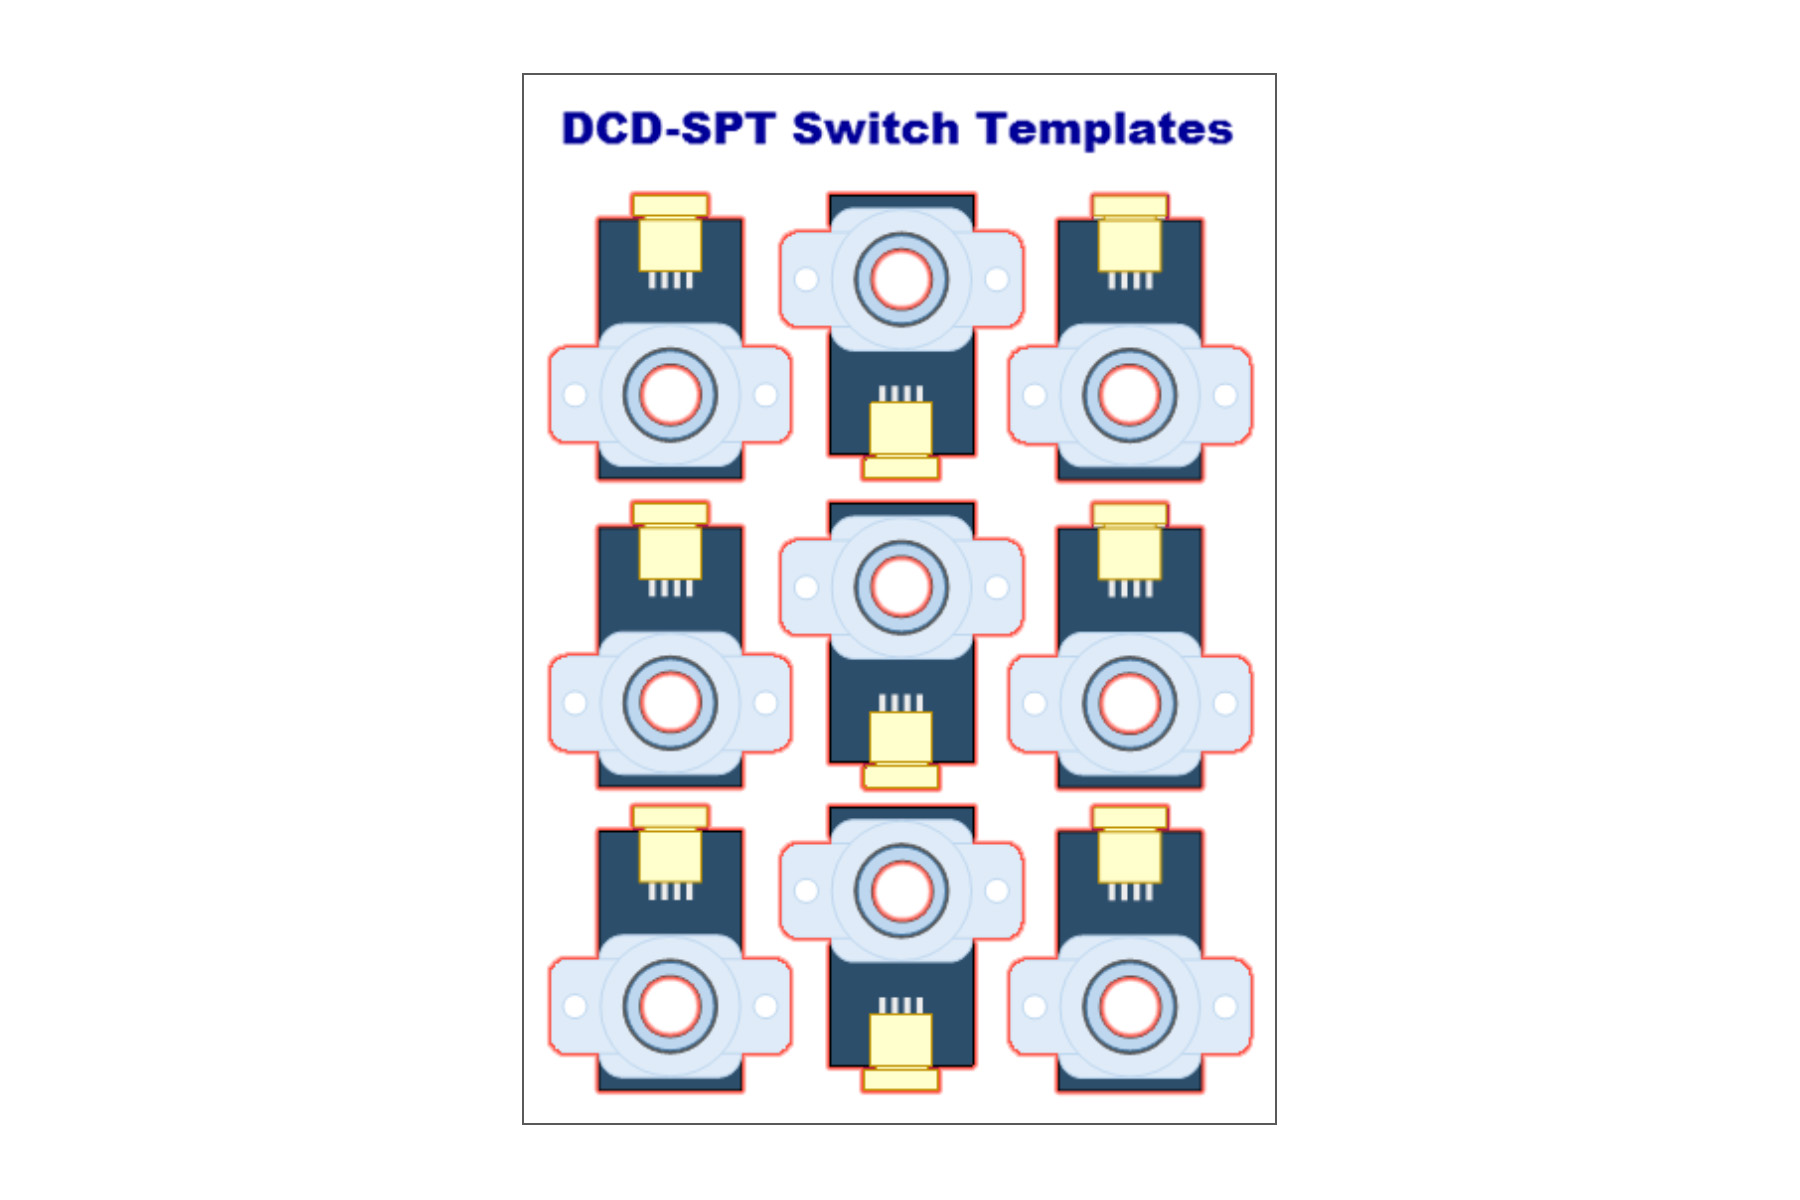 Alpha Switch Templates (Pack of 36)